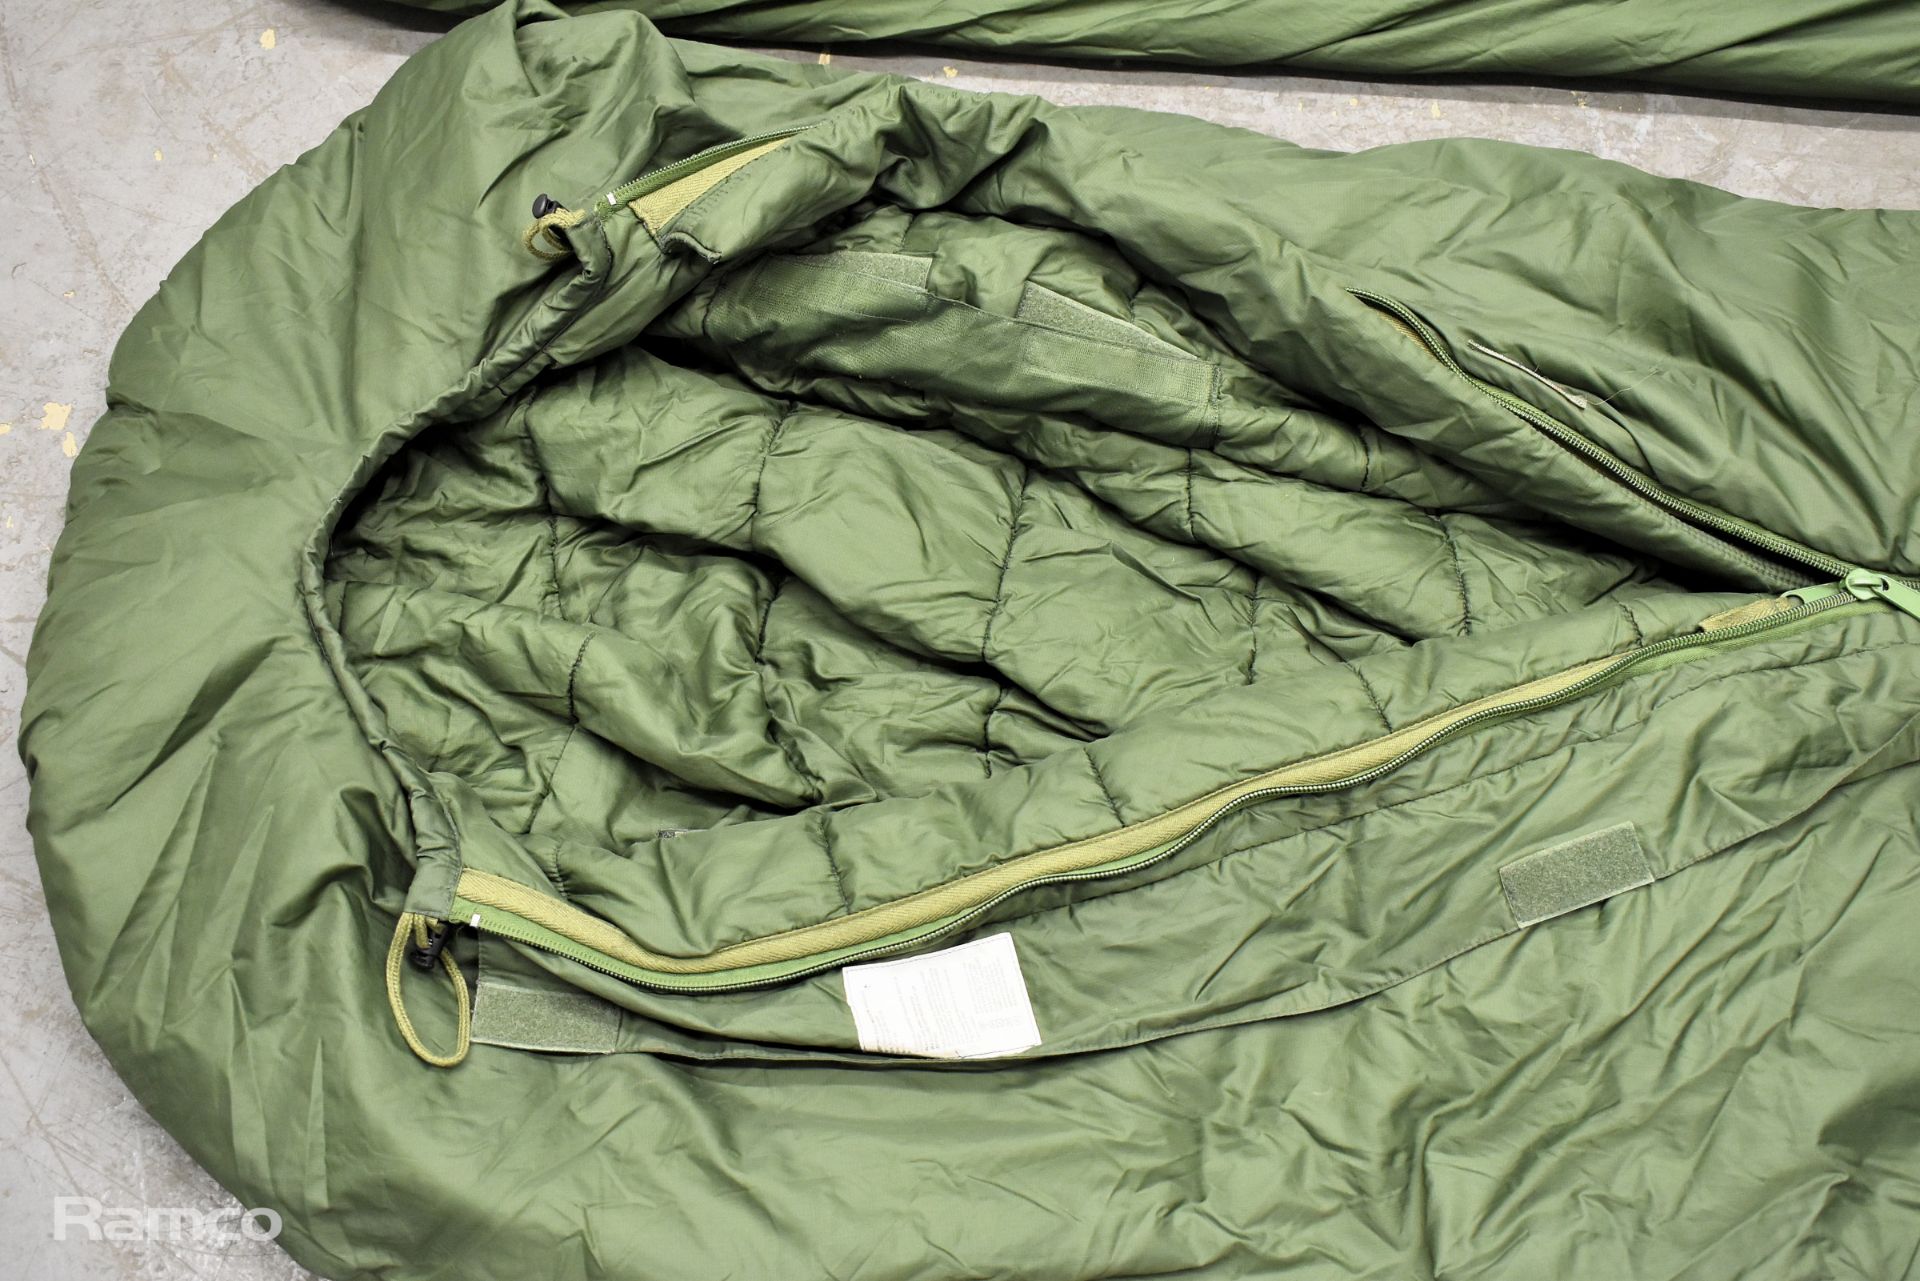 49x Sleeping bags - mixed grades and sizes - Image 7 of 8